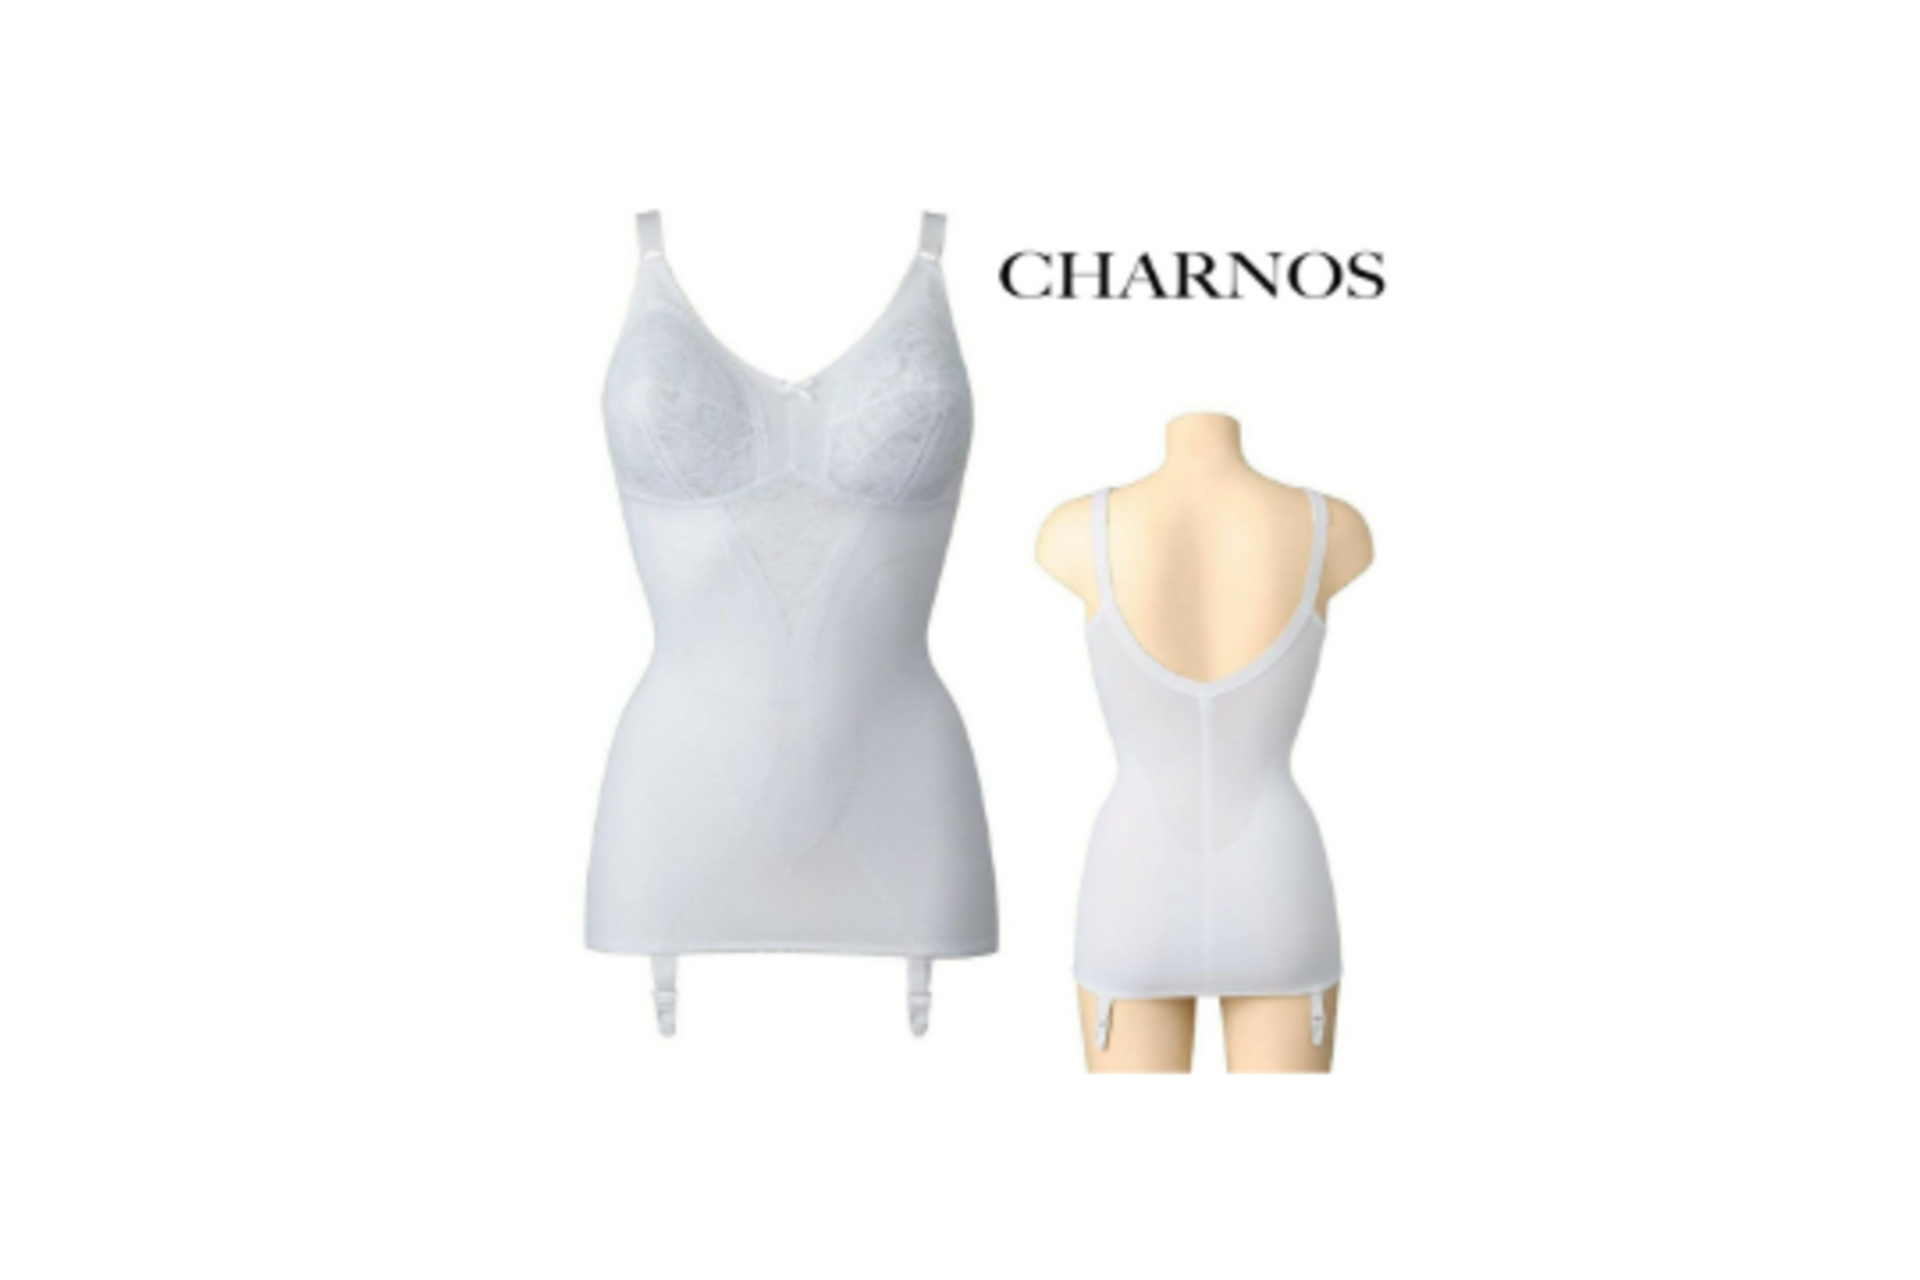 30 X BRAND NEW CHARNOS CORSELETTES WITH SUSPENDERS SIZES 34/36